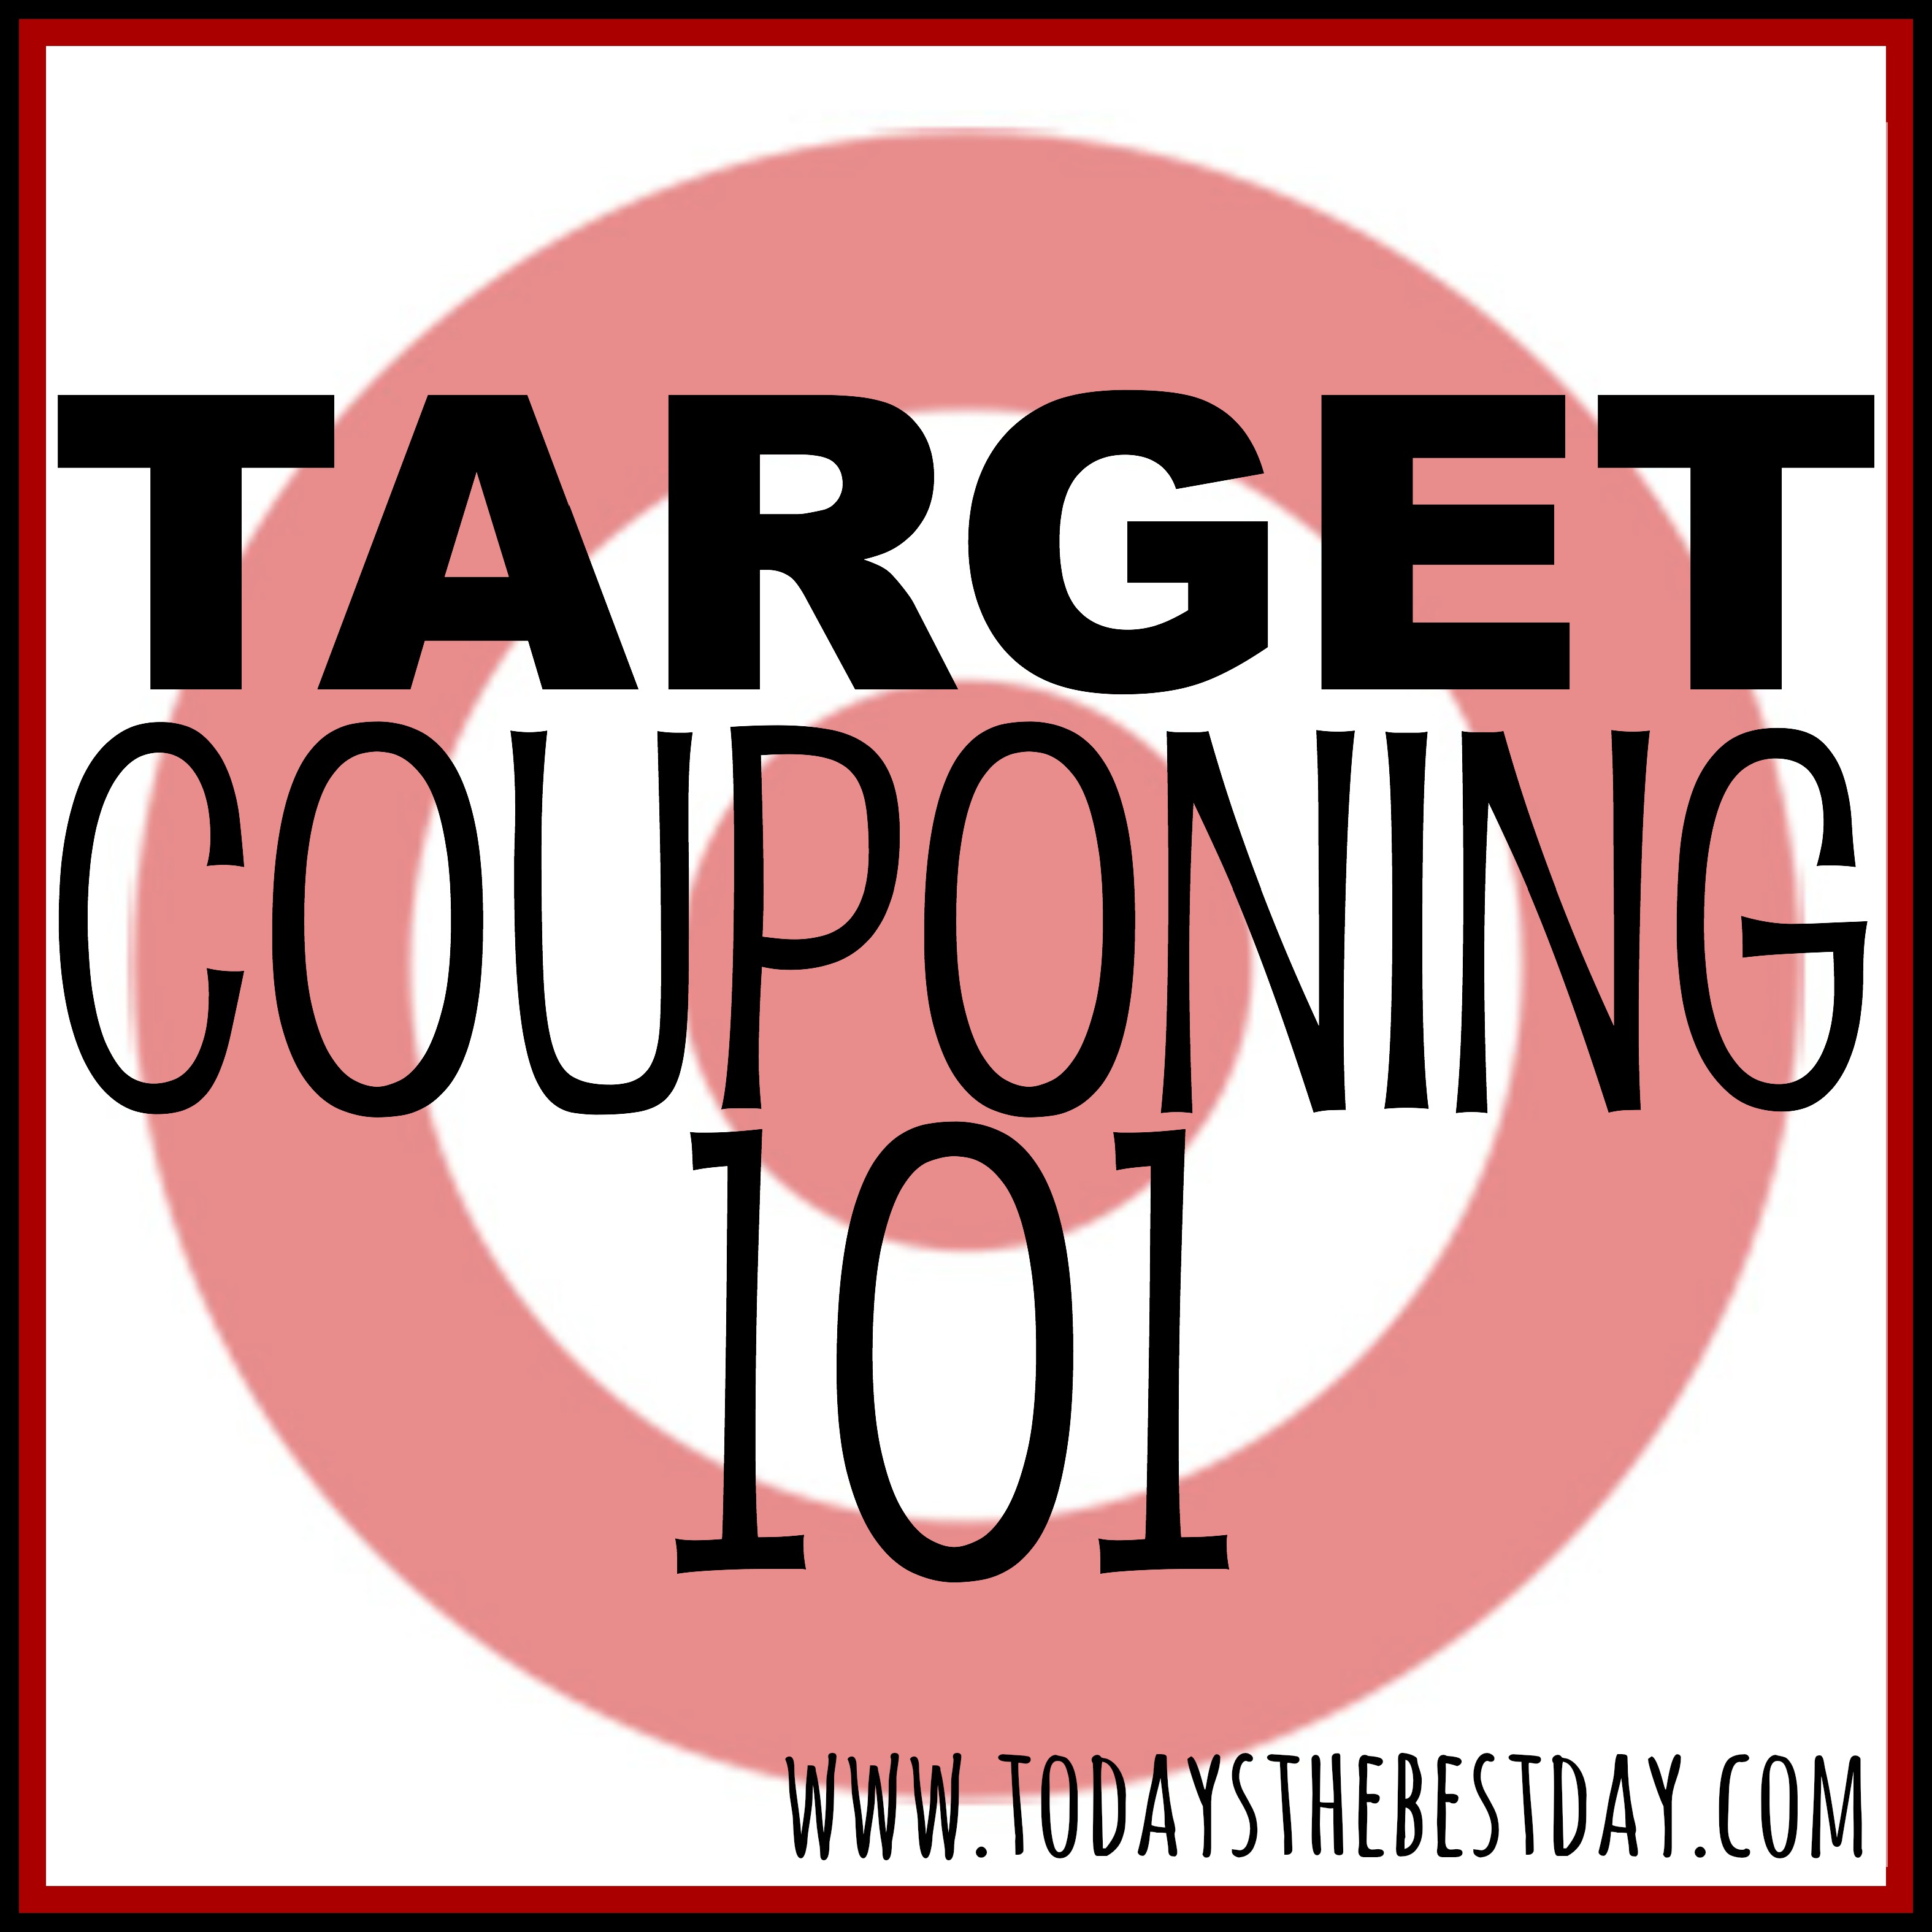 Target Couponing 101 - Today's the Best Day